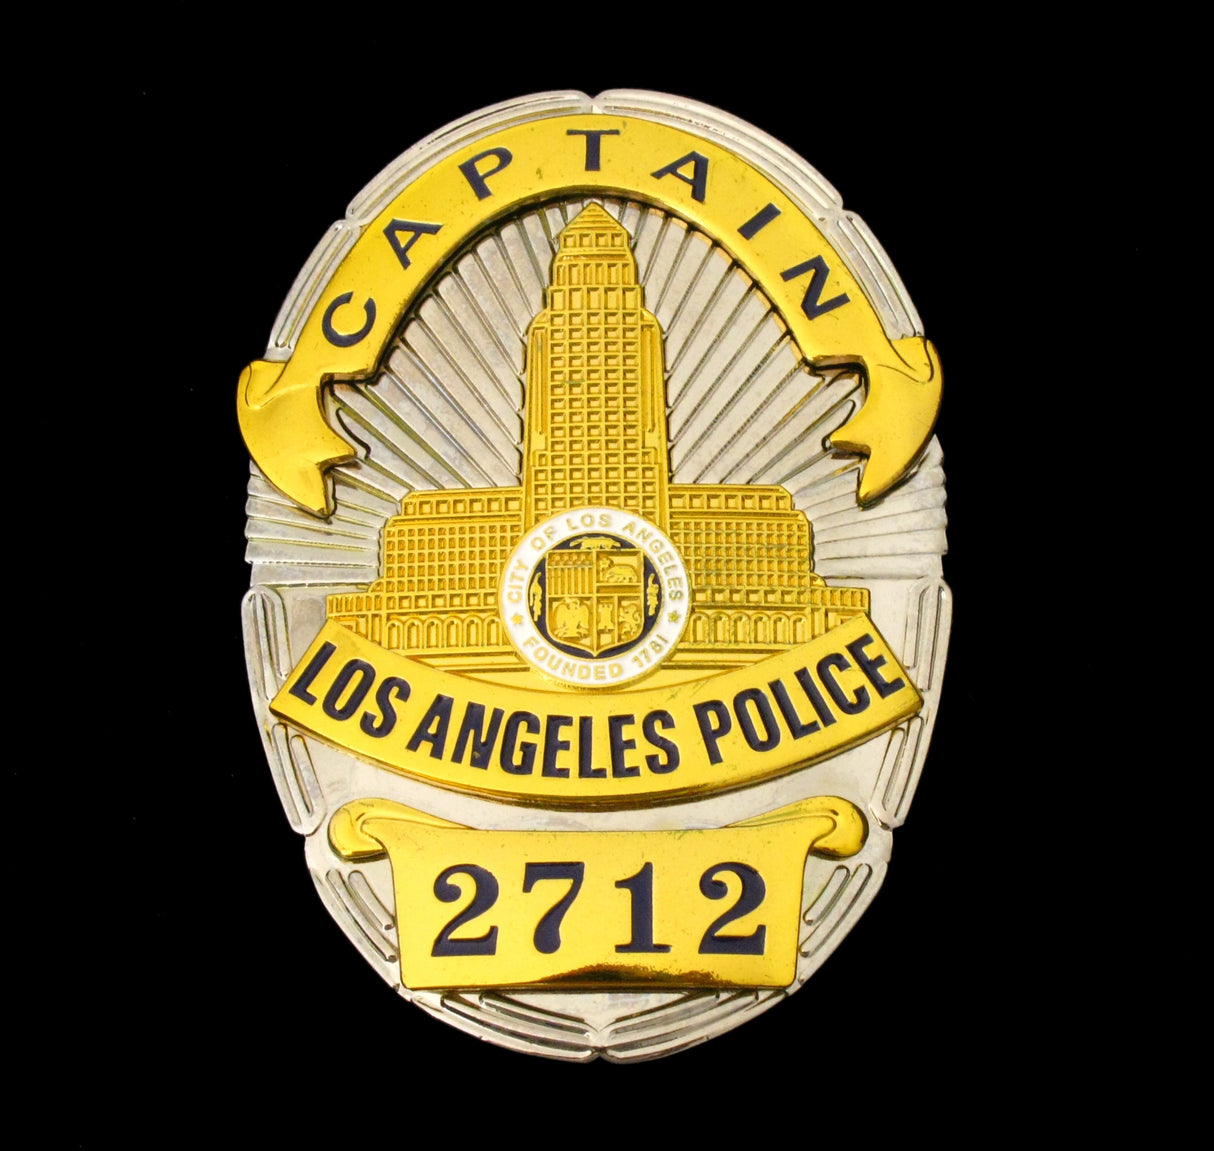 LAPD Los Angeles Police CAPTAIN Badge Solid Copper Replica Movie Props With Number 2712